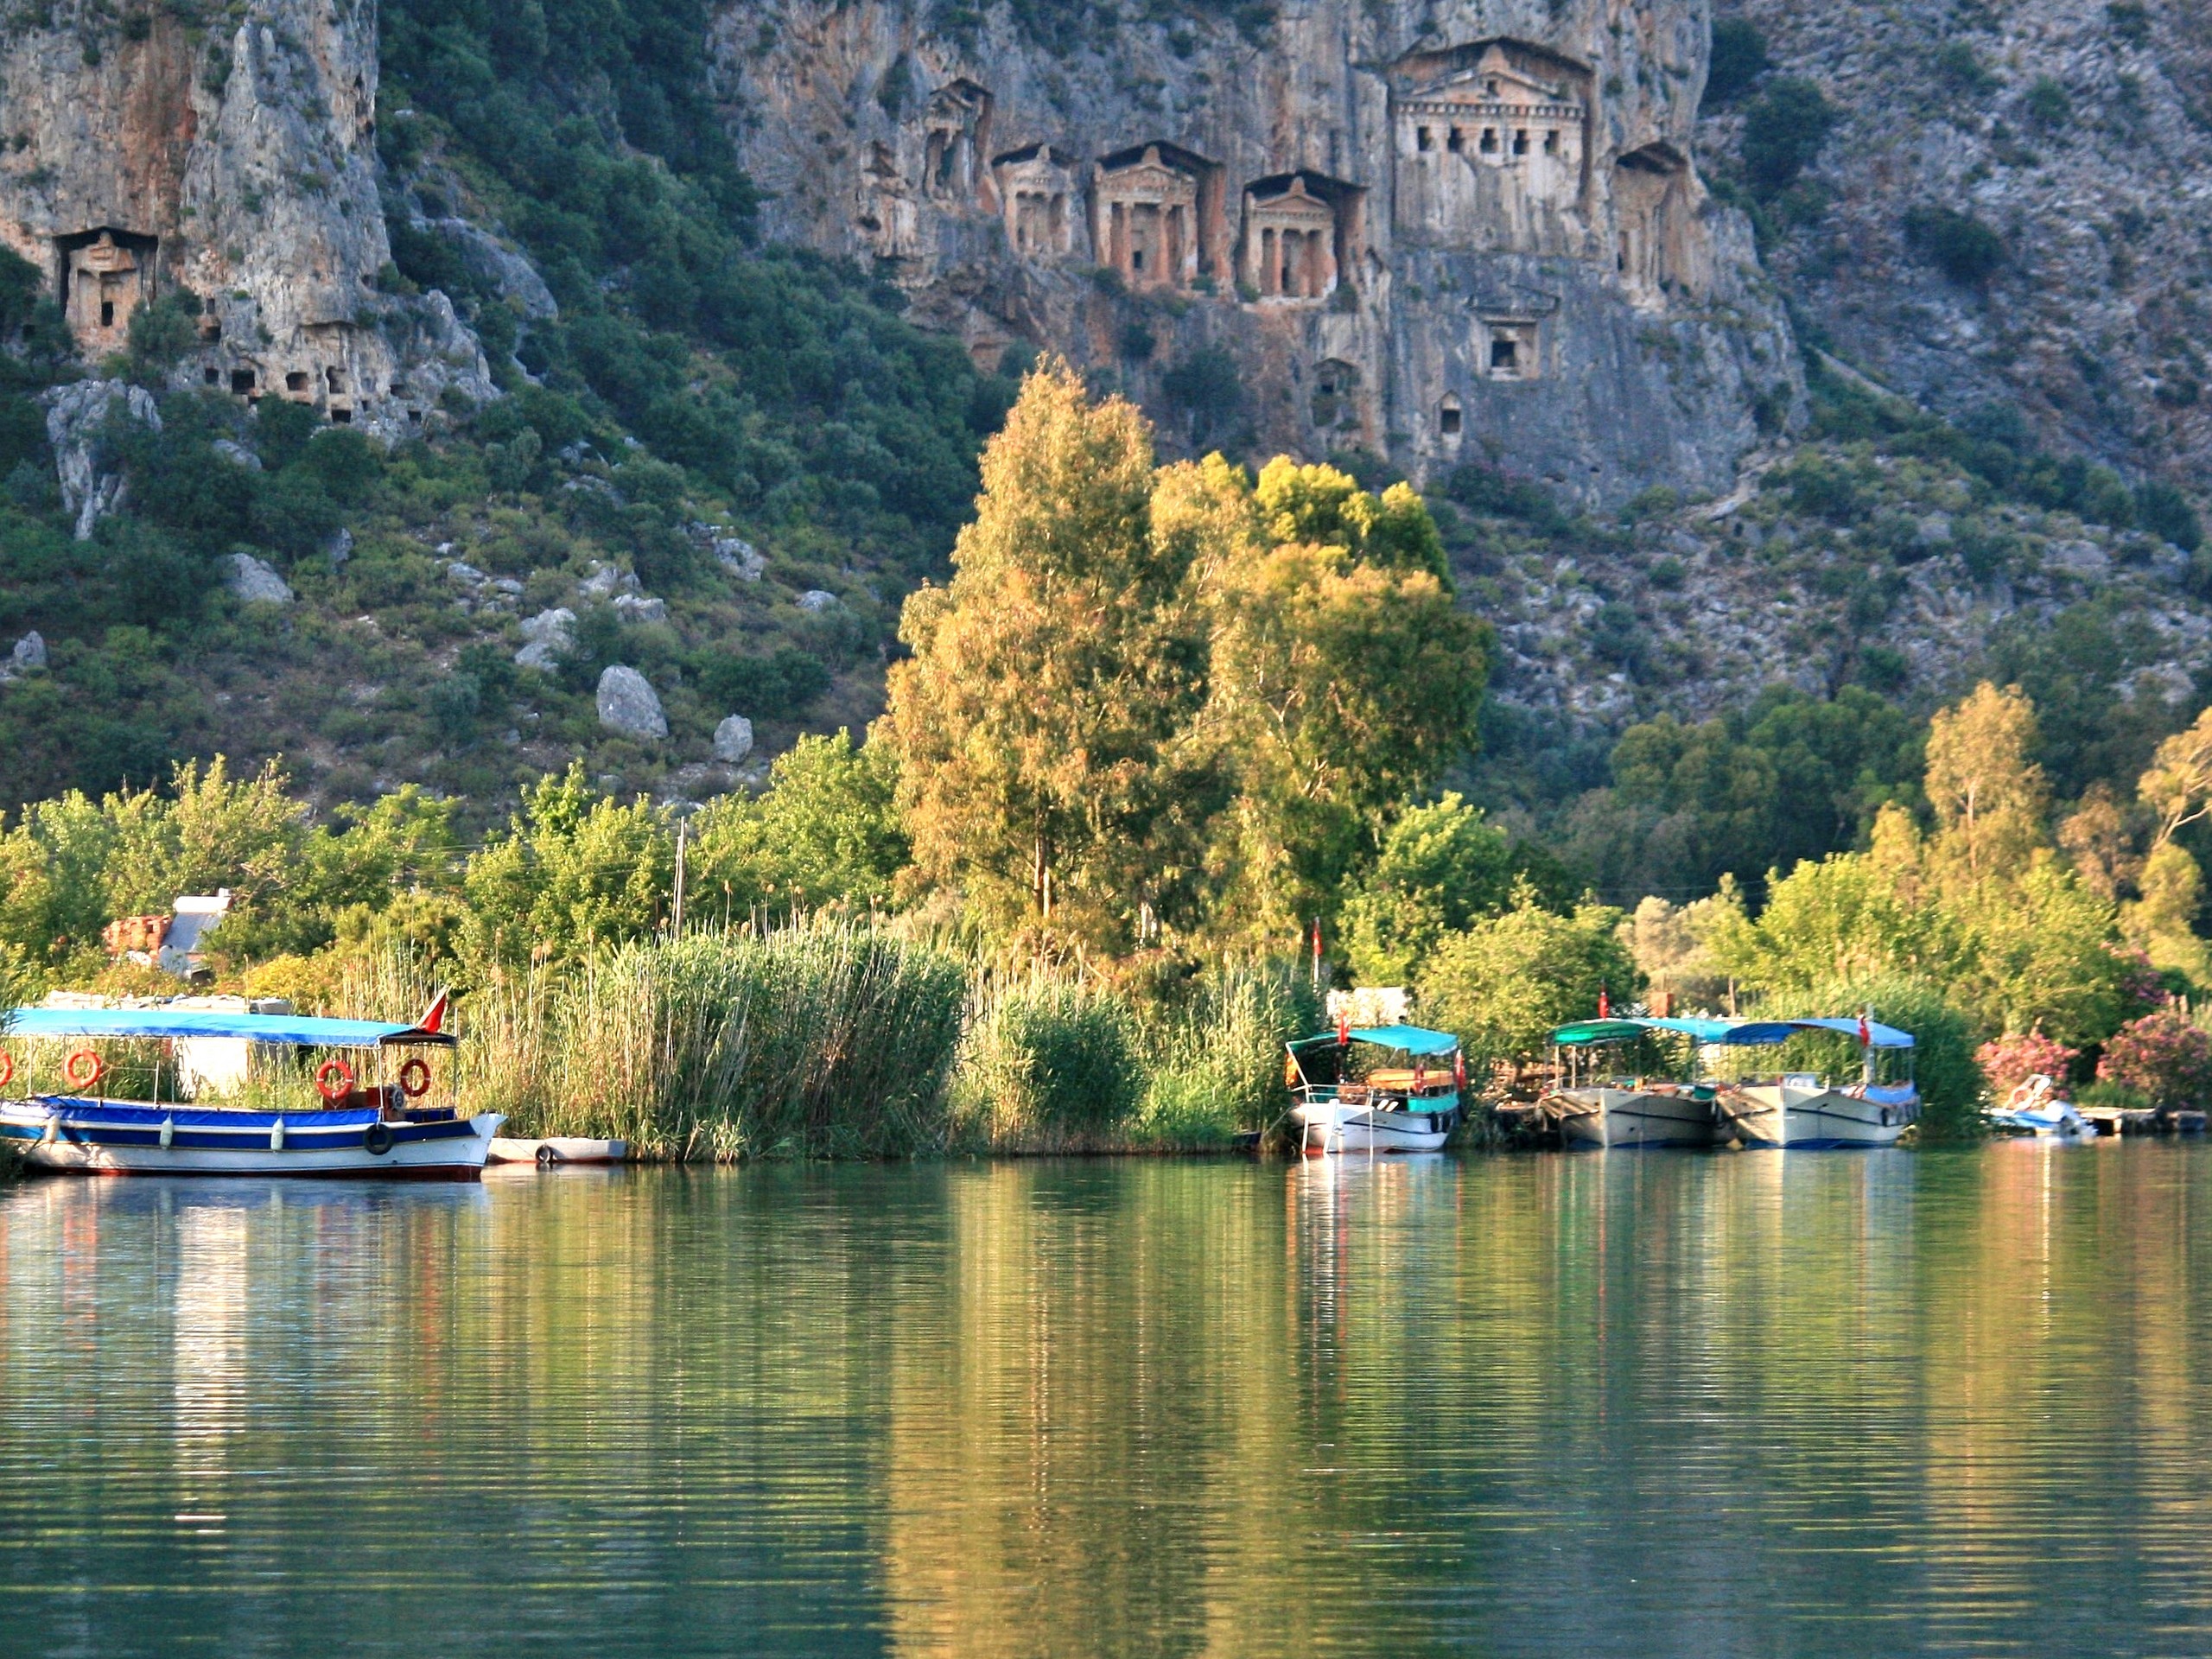 Lycian graveyard as seen from the water